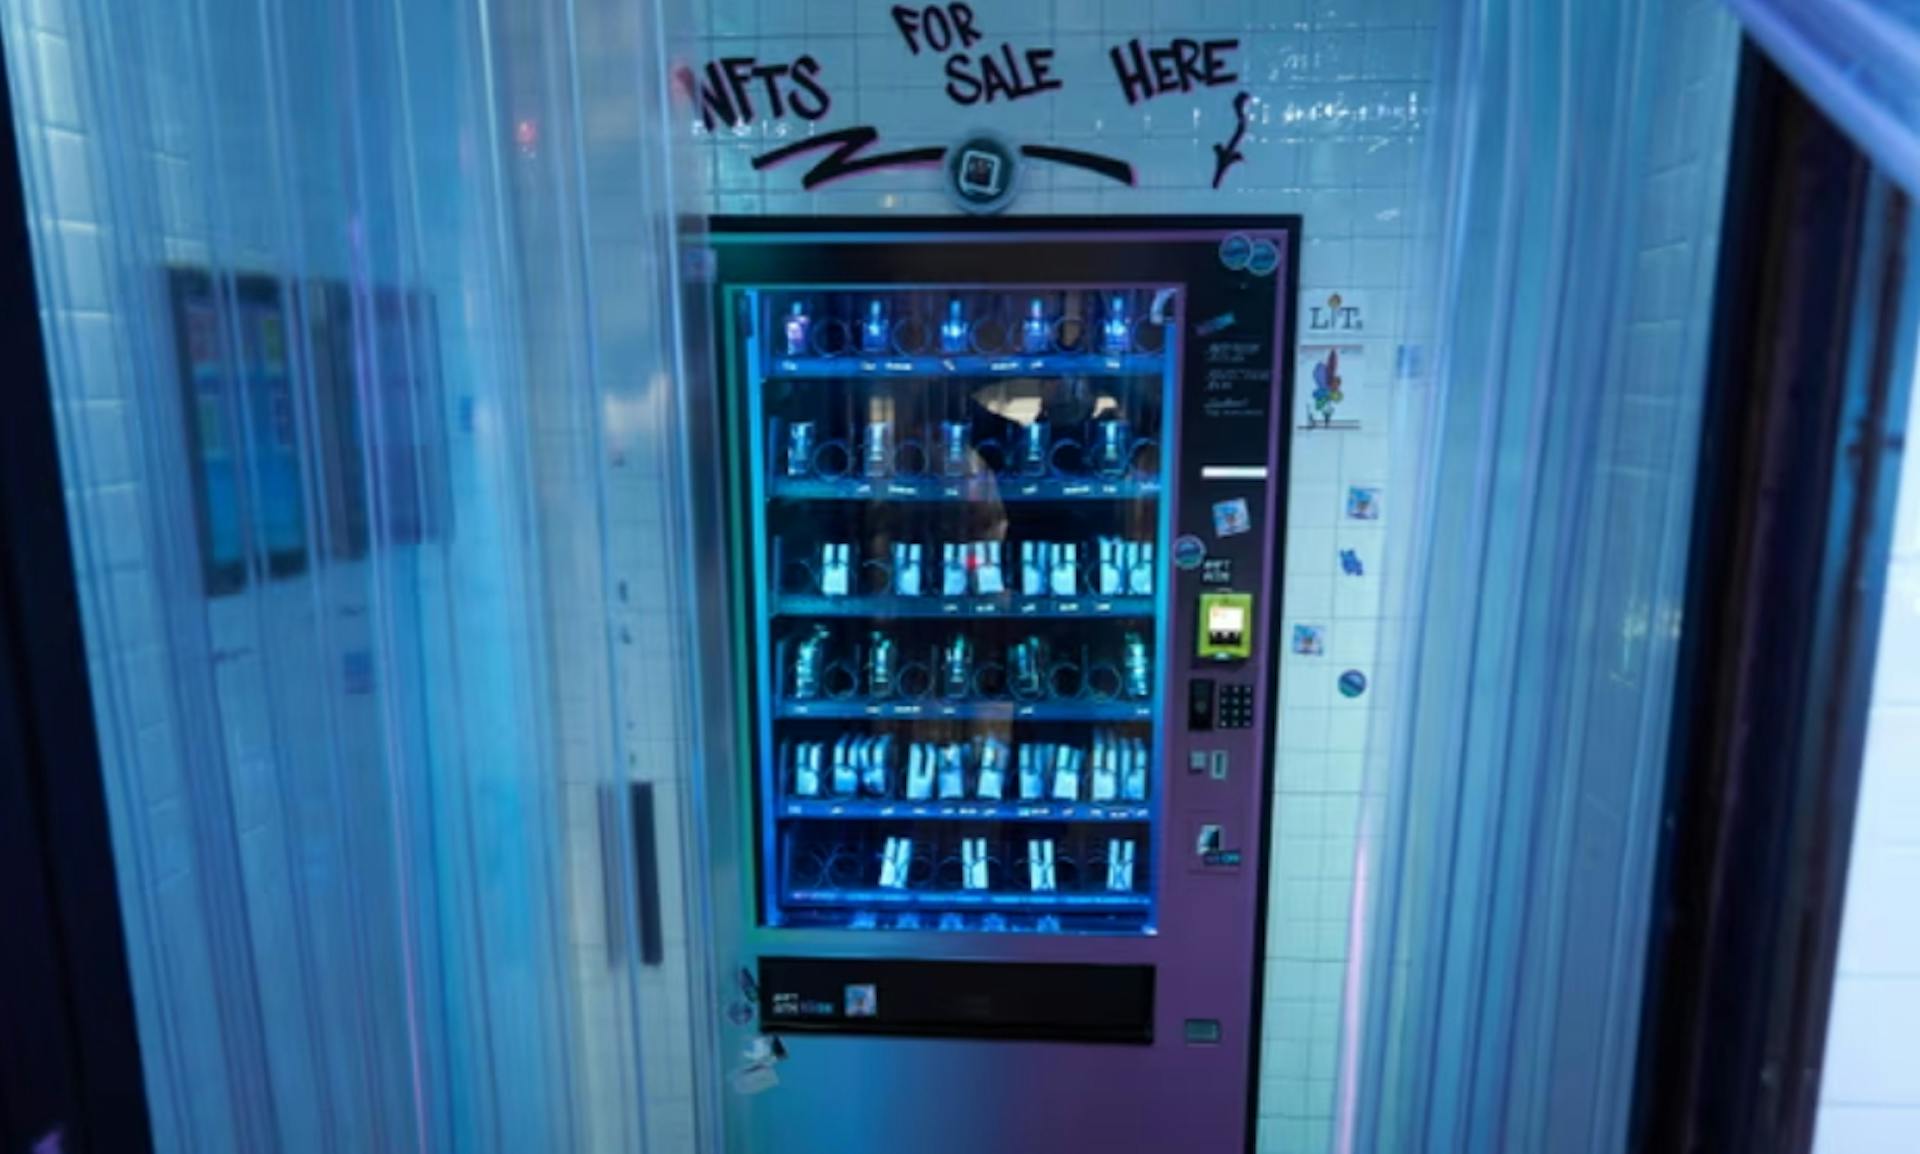 Neon NFT vending machine in NY. Image by Wilfred Chan, The Guardian